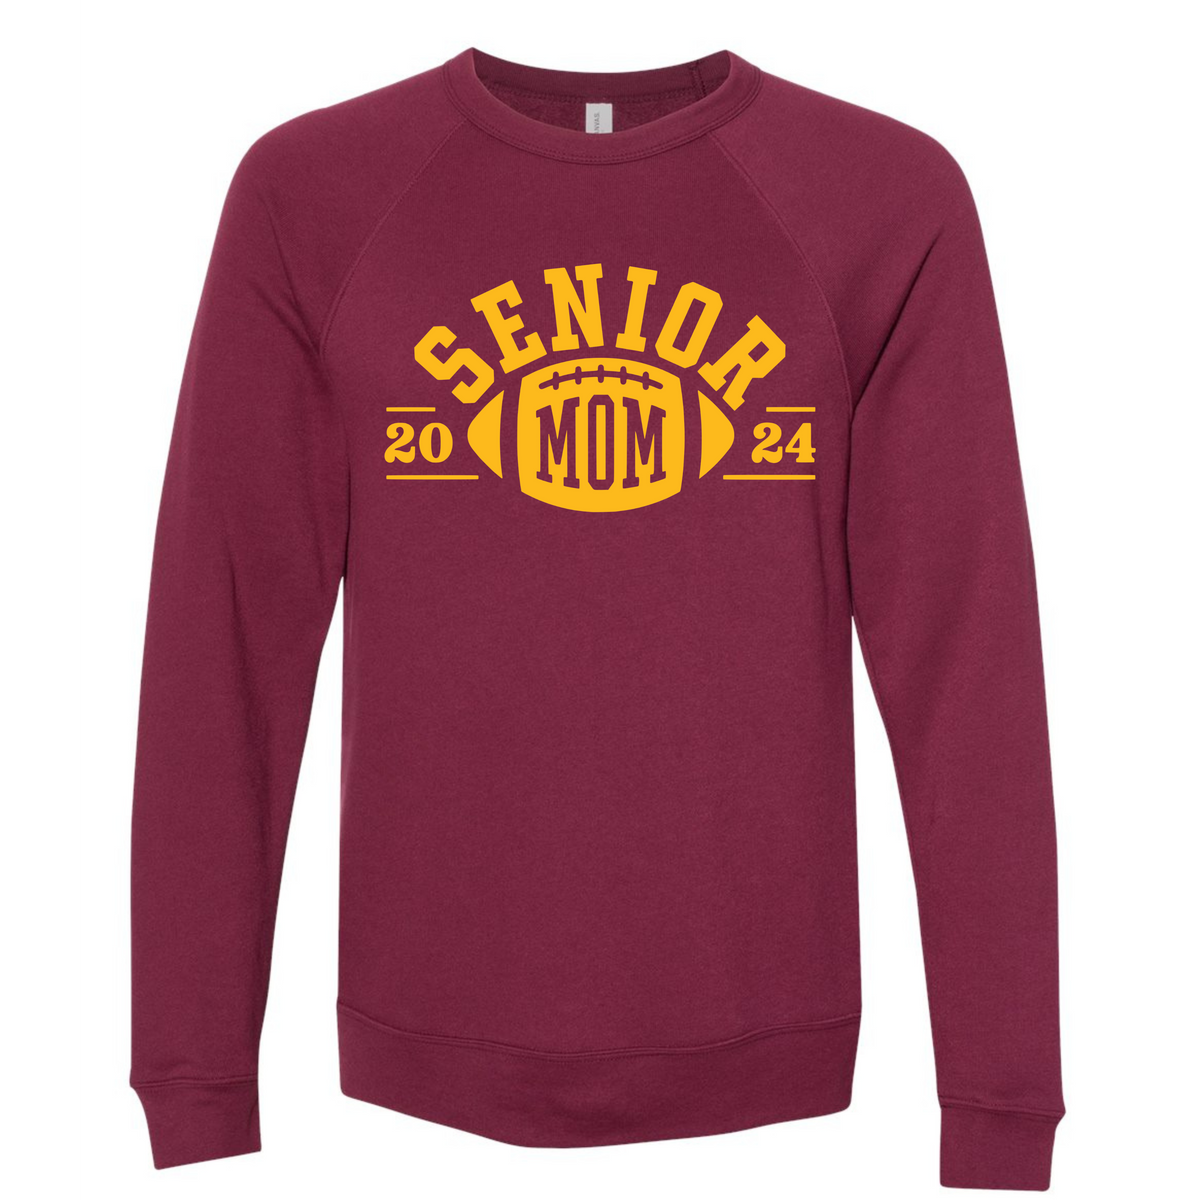 R/W Senior Mom 2024 on Maroon Several Styles to Choose From